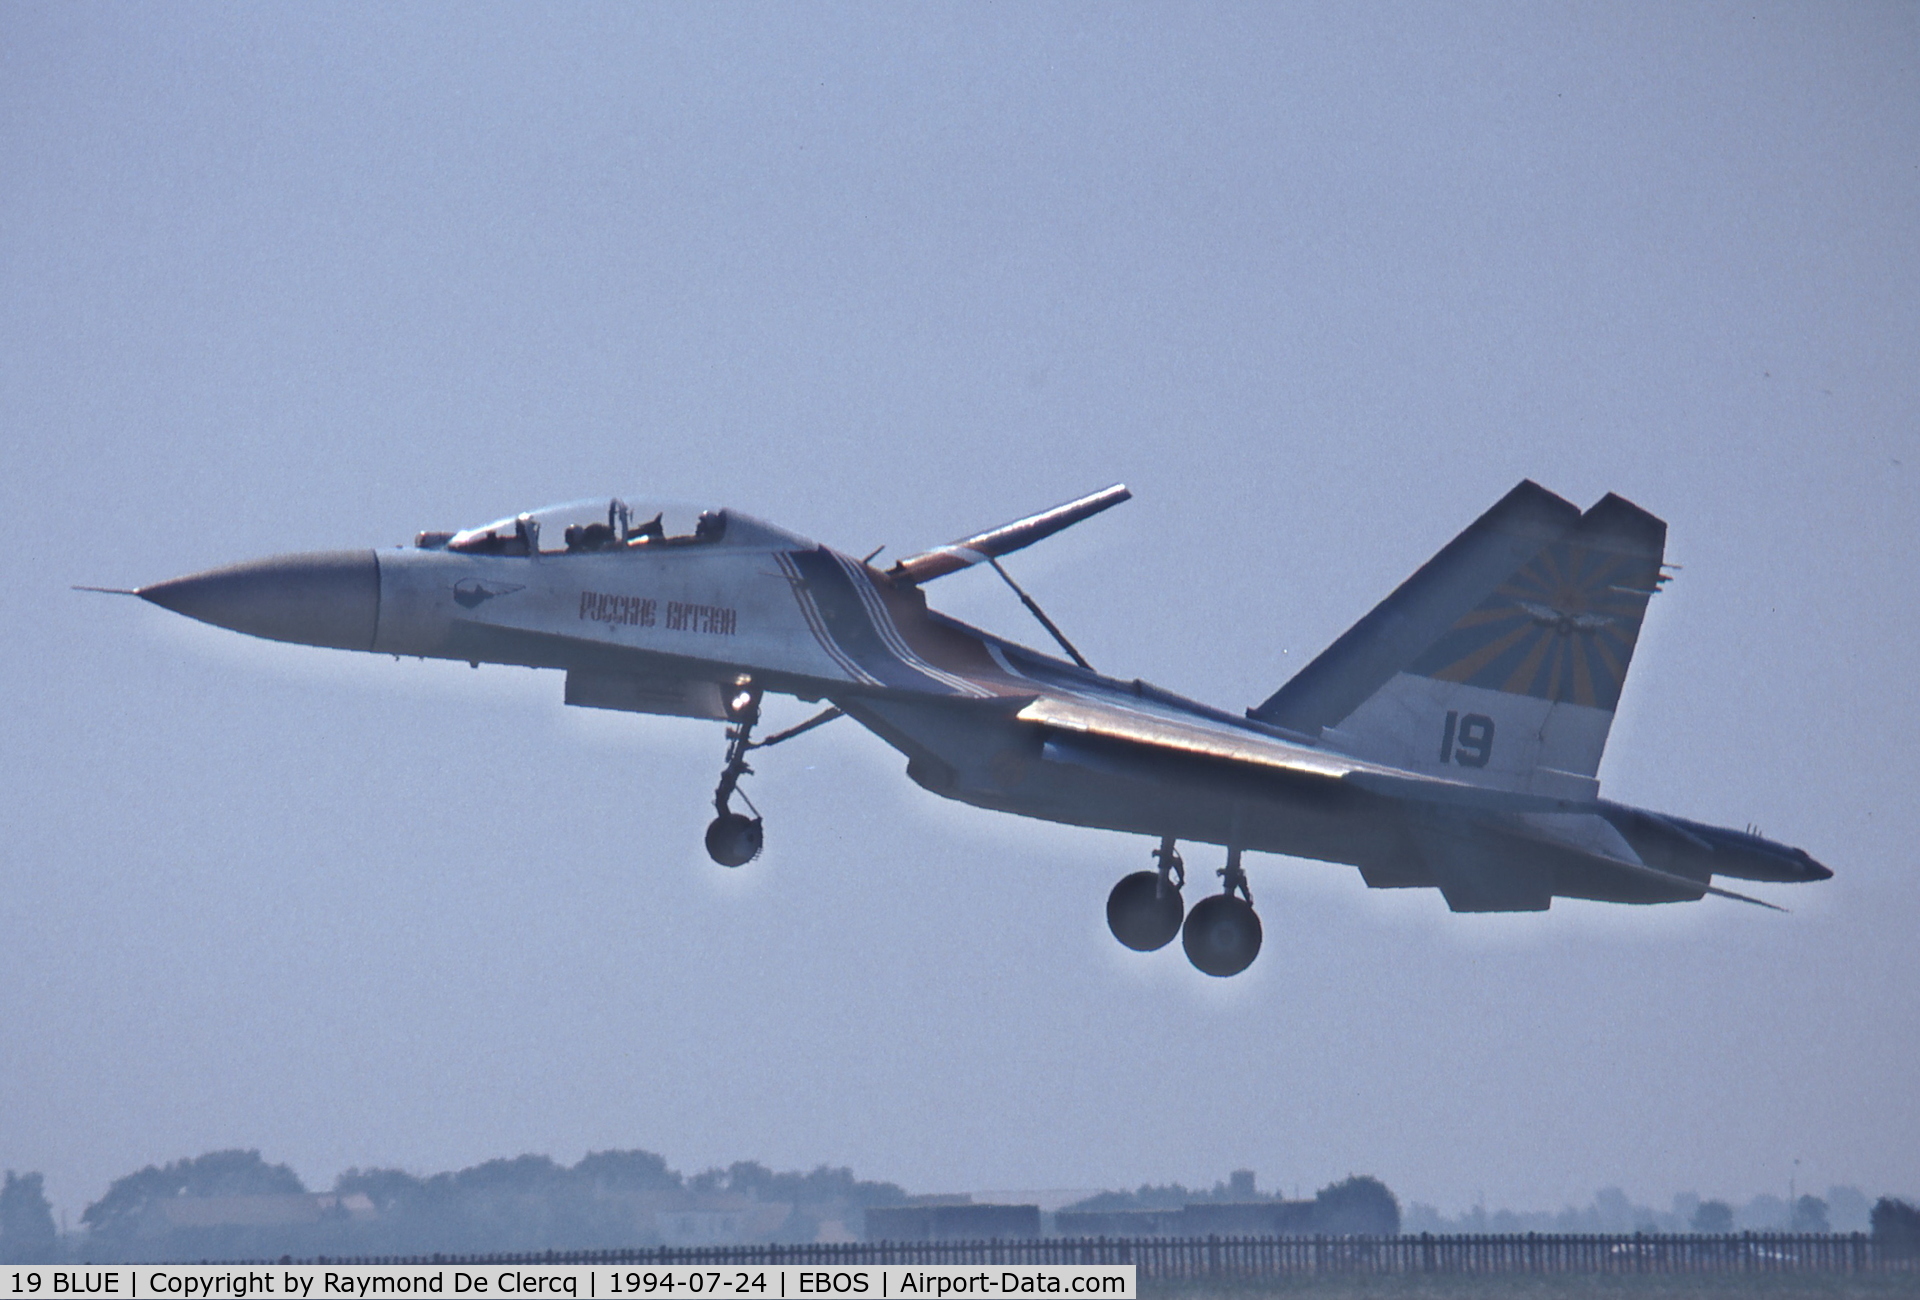 19 BLUE, Sukhoi Su-27UB C/N 1040807, Landing at the Ostend Airshow on 1994-07-24.